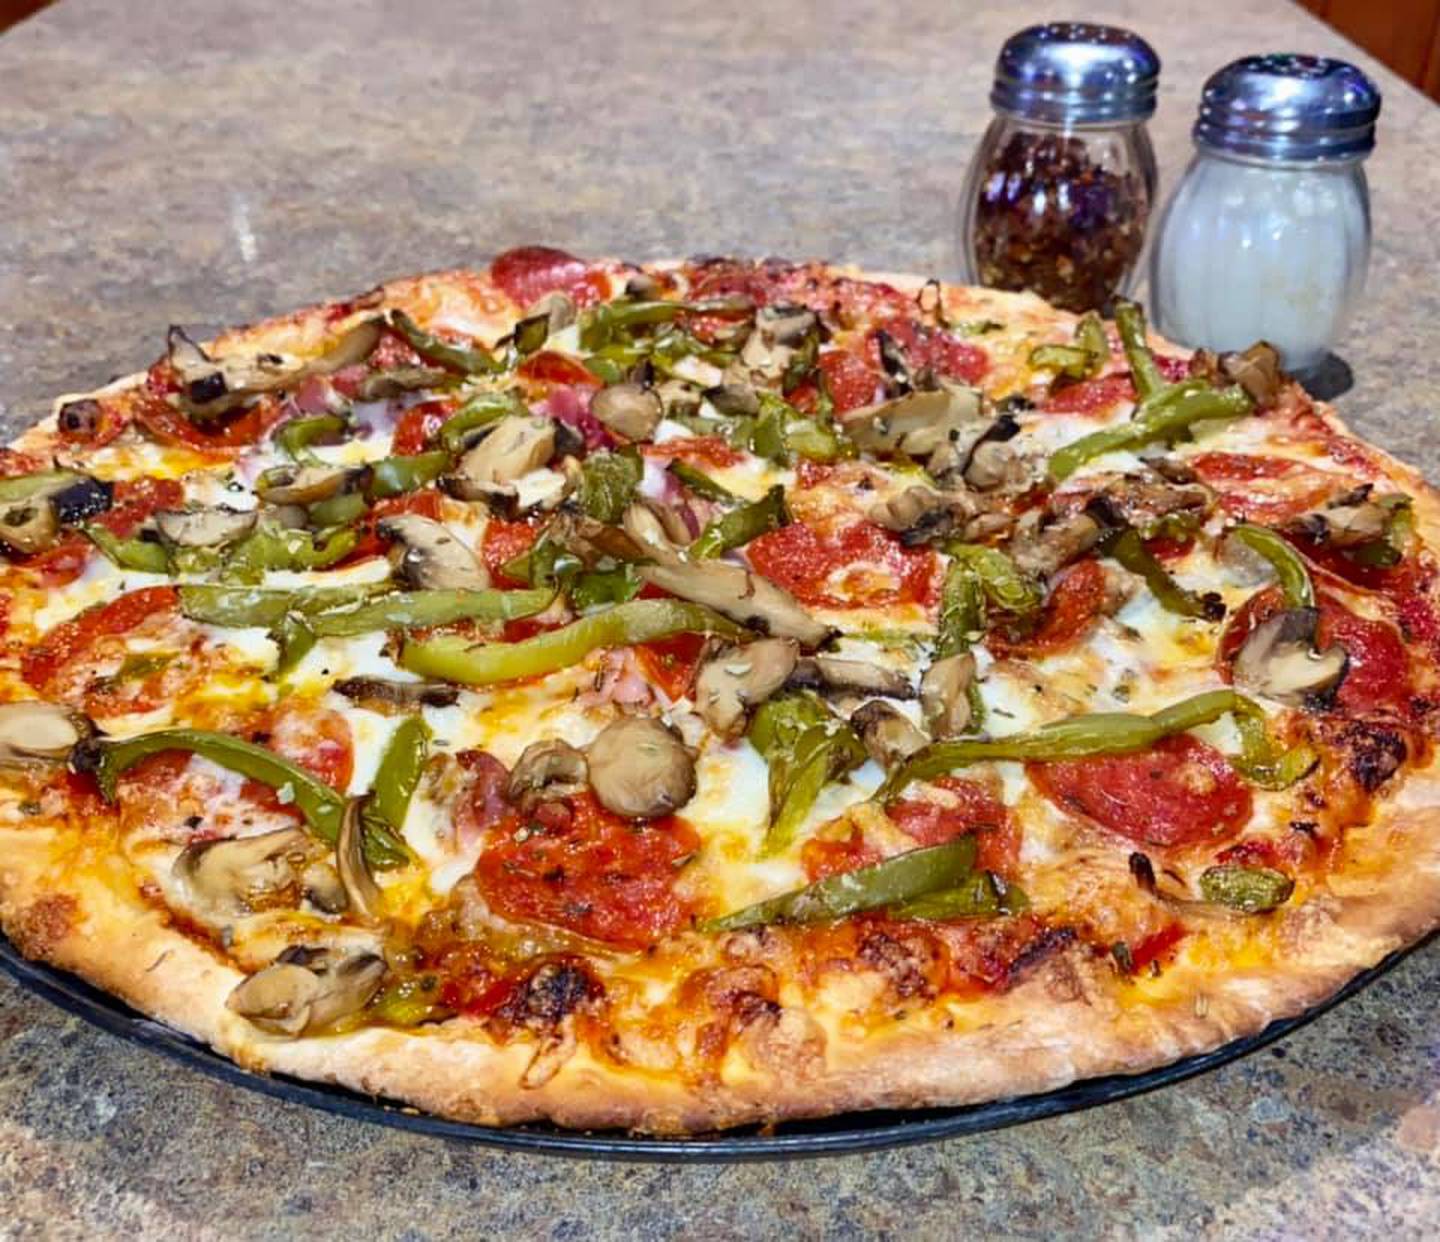 Cemeno's Pizza in Joliet was named the best thin crust pizza places in Will County by readers in 2021. (Photo from Cemeno's Pizza Facebook page)